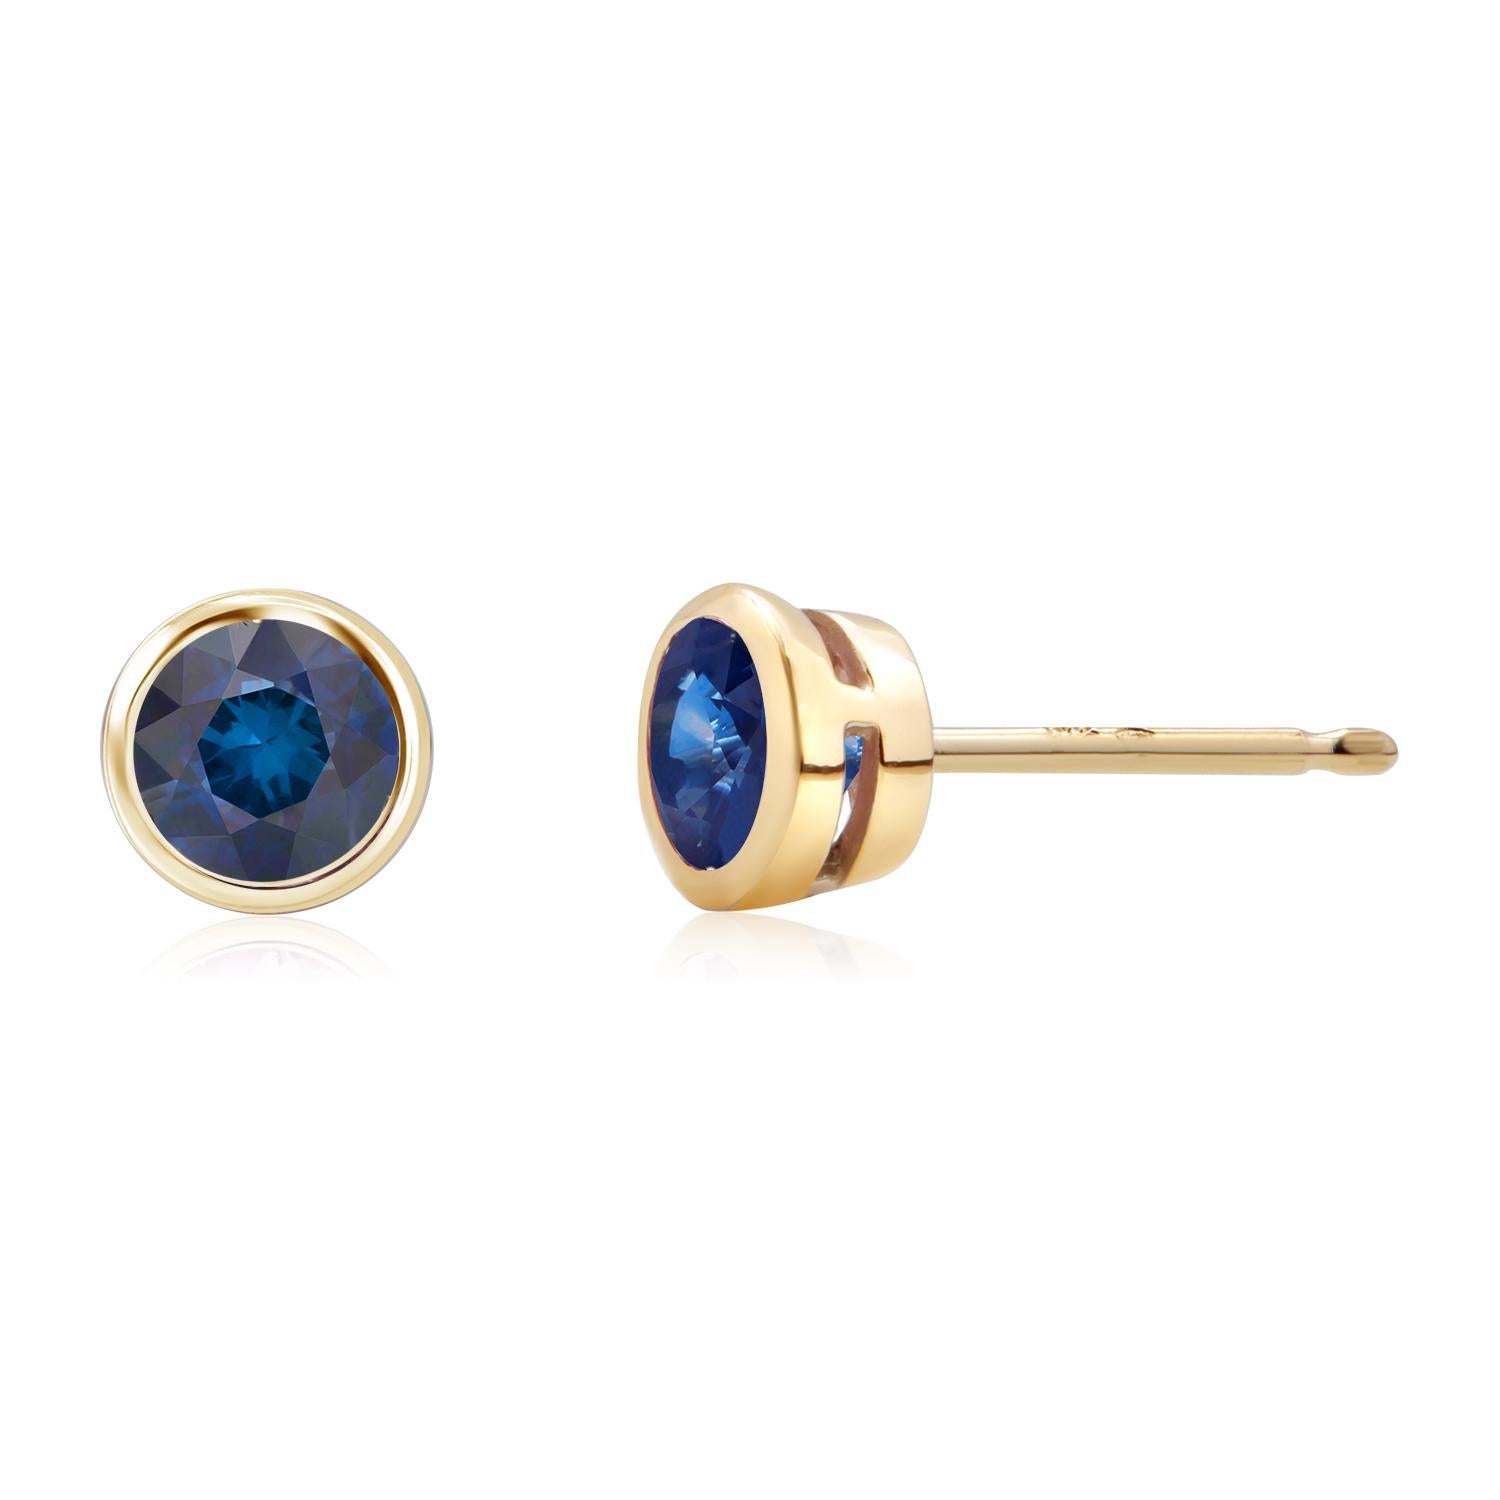 Matched Round Sapphire 0.40 Carat 14 Karat Yellow Gold 0.15 Inch Stud Earrings  1